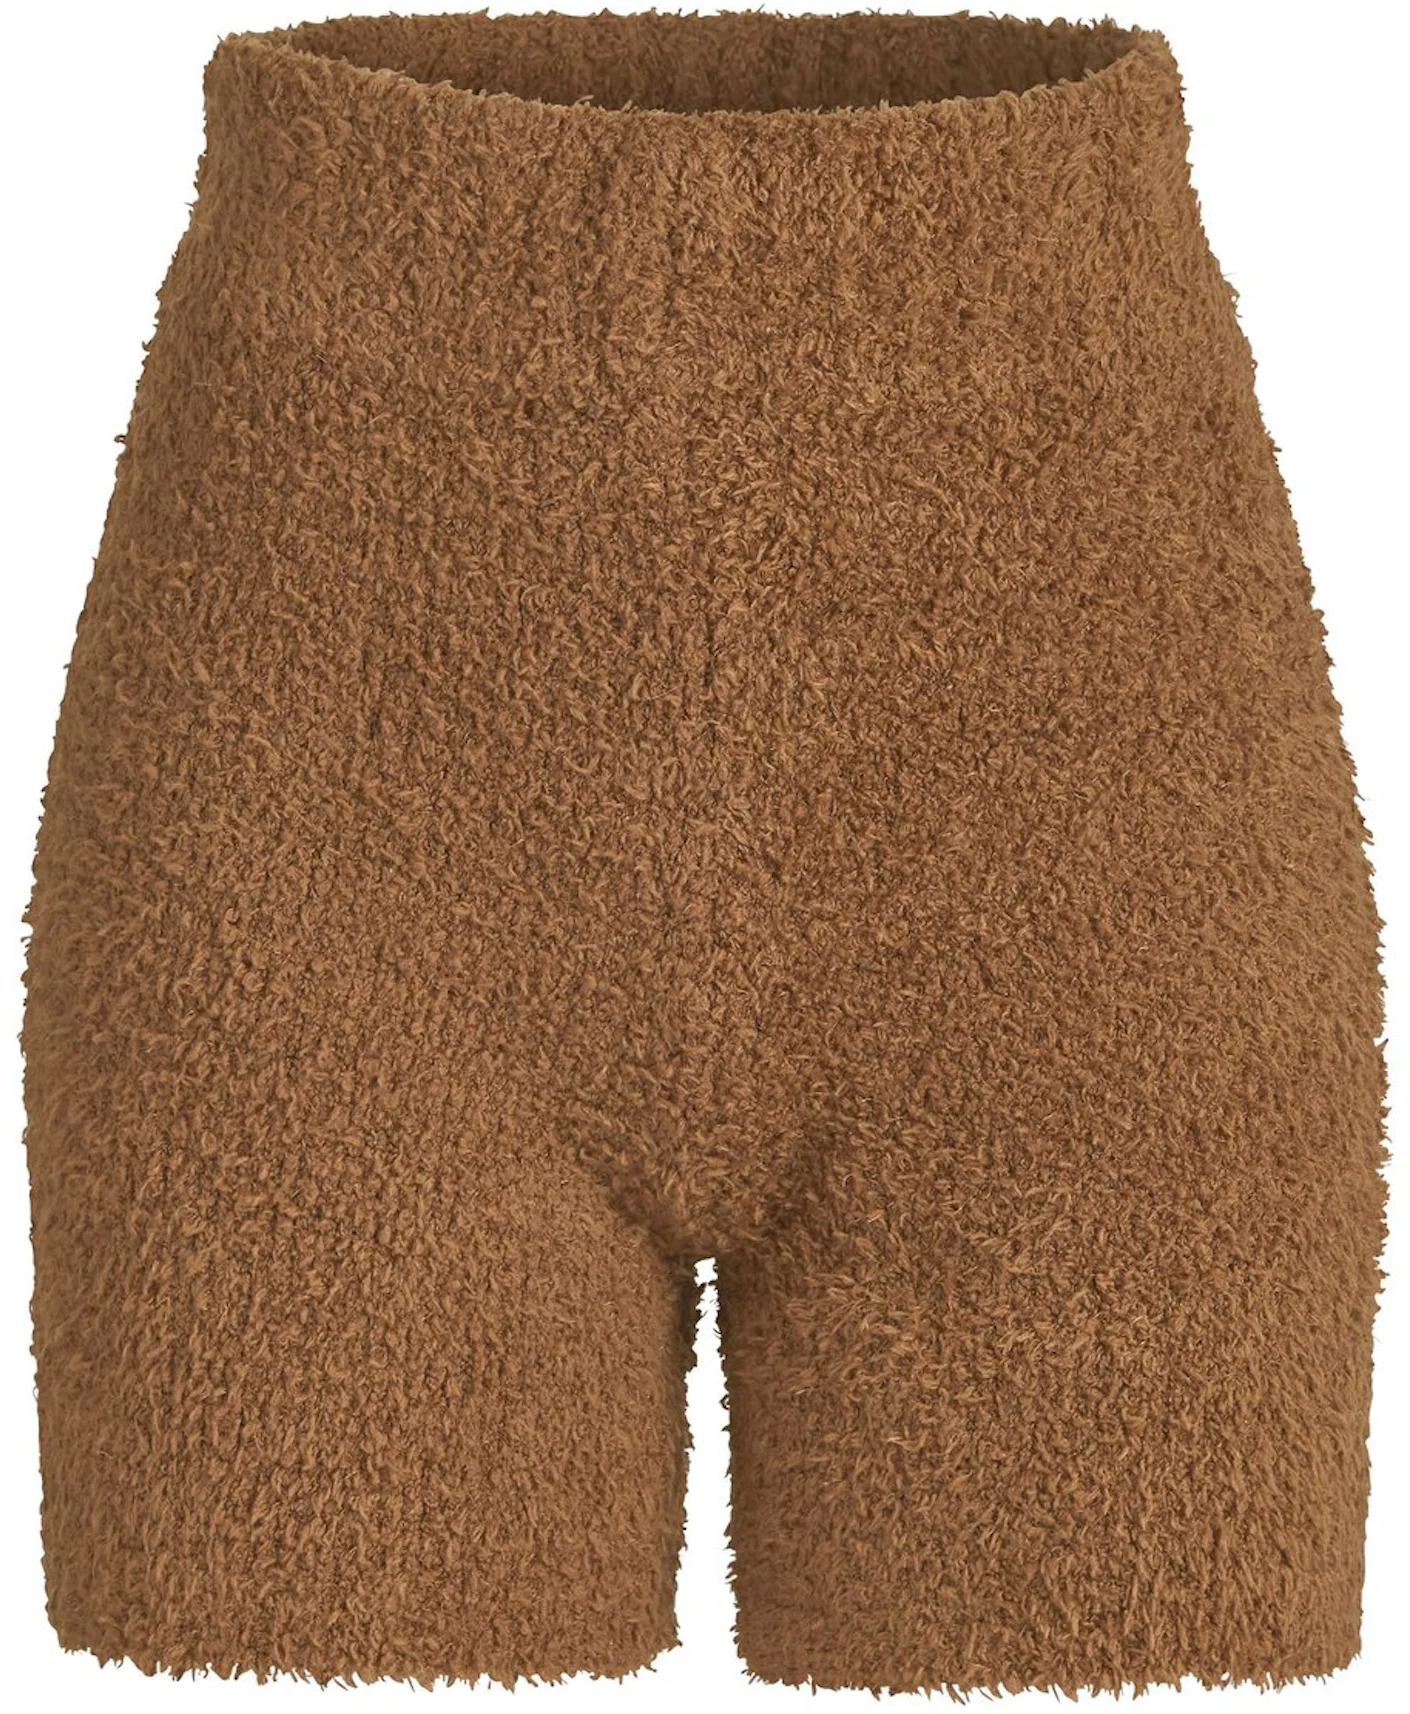 SKIMS Cozy Knit Short in Juniper 4X/5X - $75 New With Tags - From Matilda